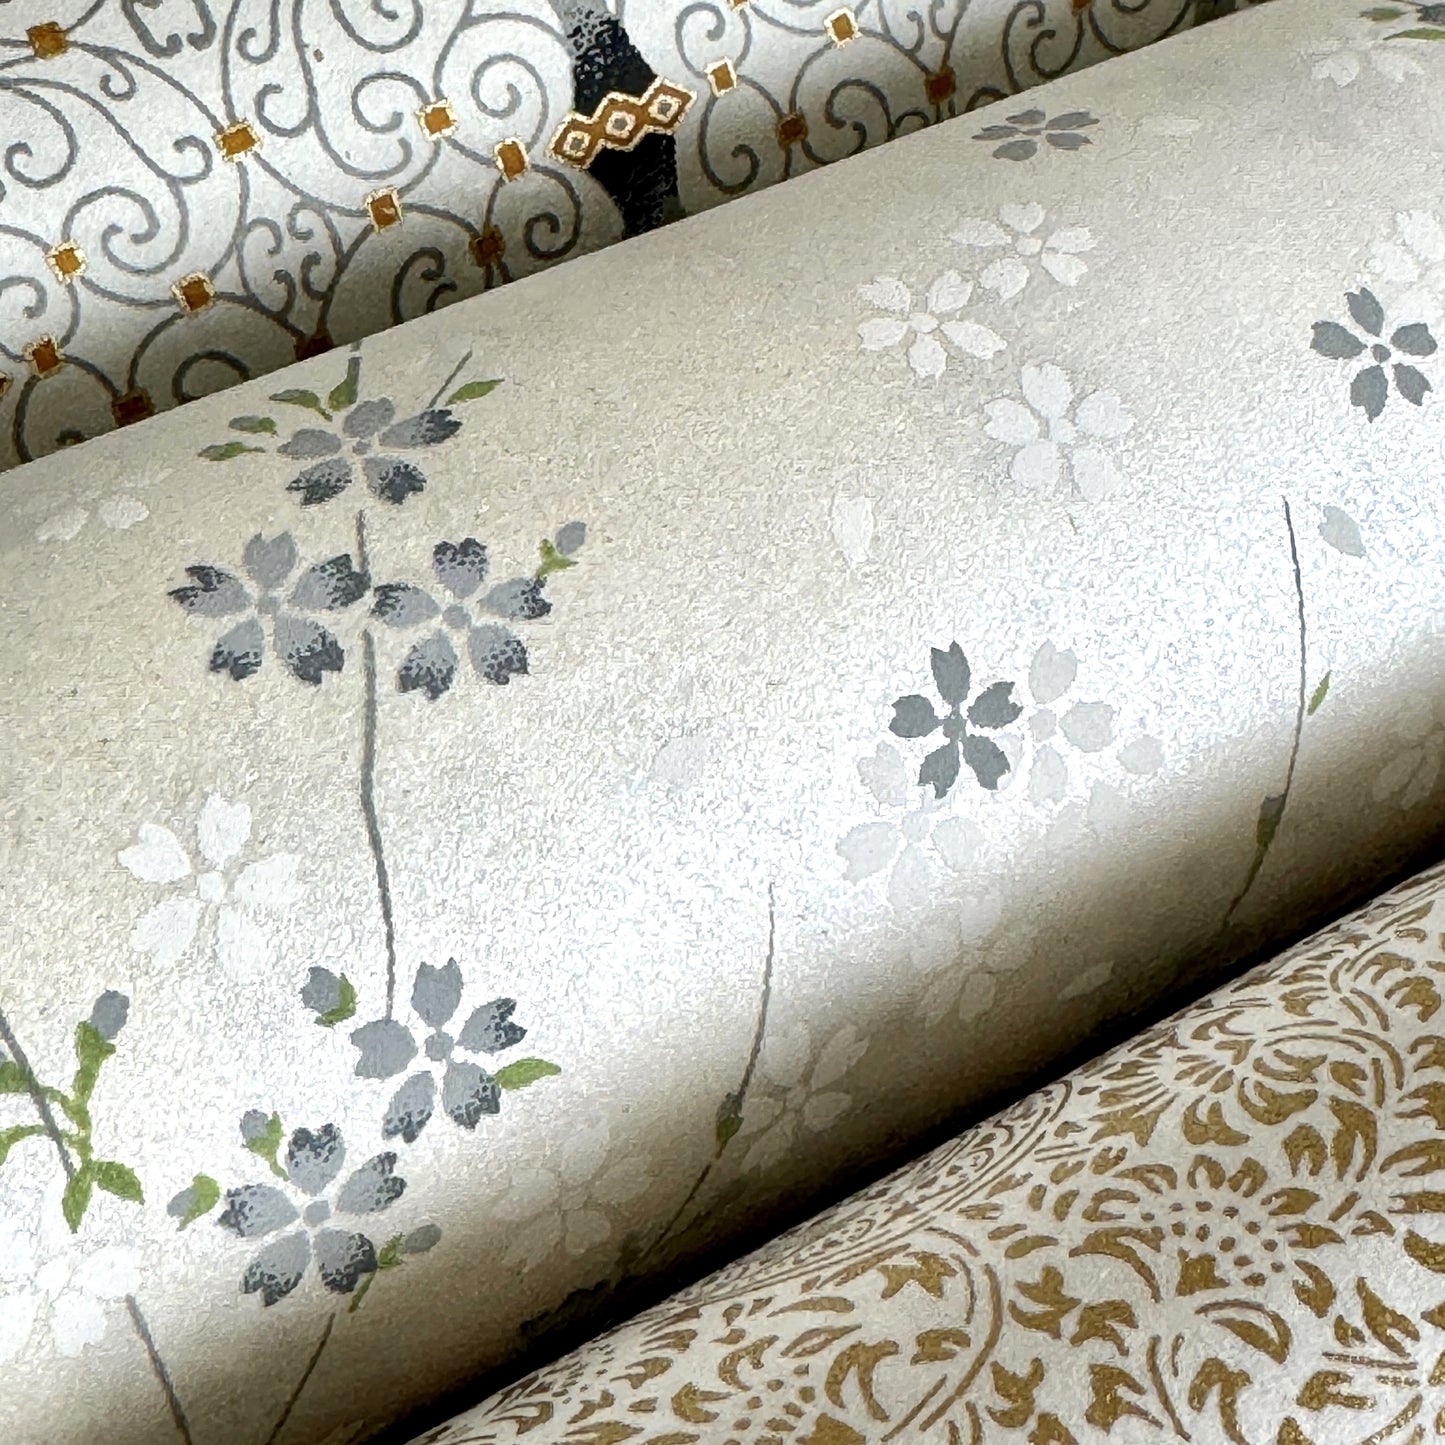 Japanese silkscreen chiyogami paper with a delicate flower design in soft grey on an ivory pearlescent backdrop. Close-up